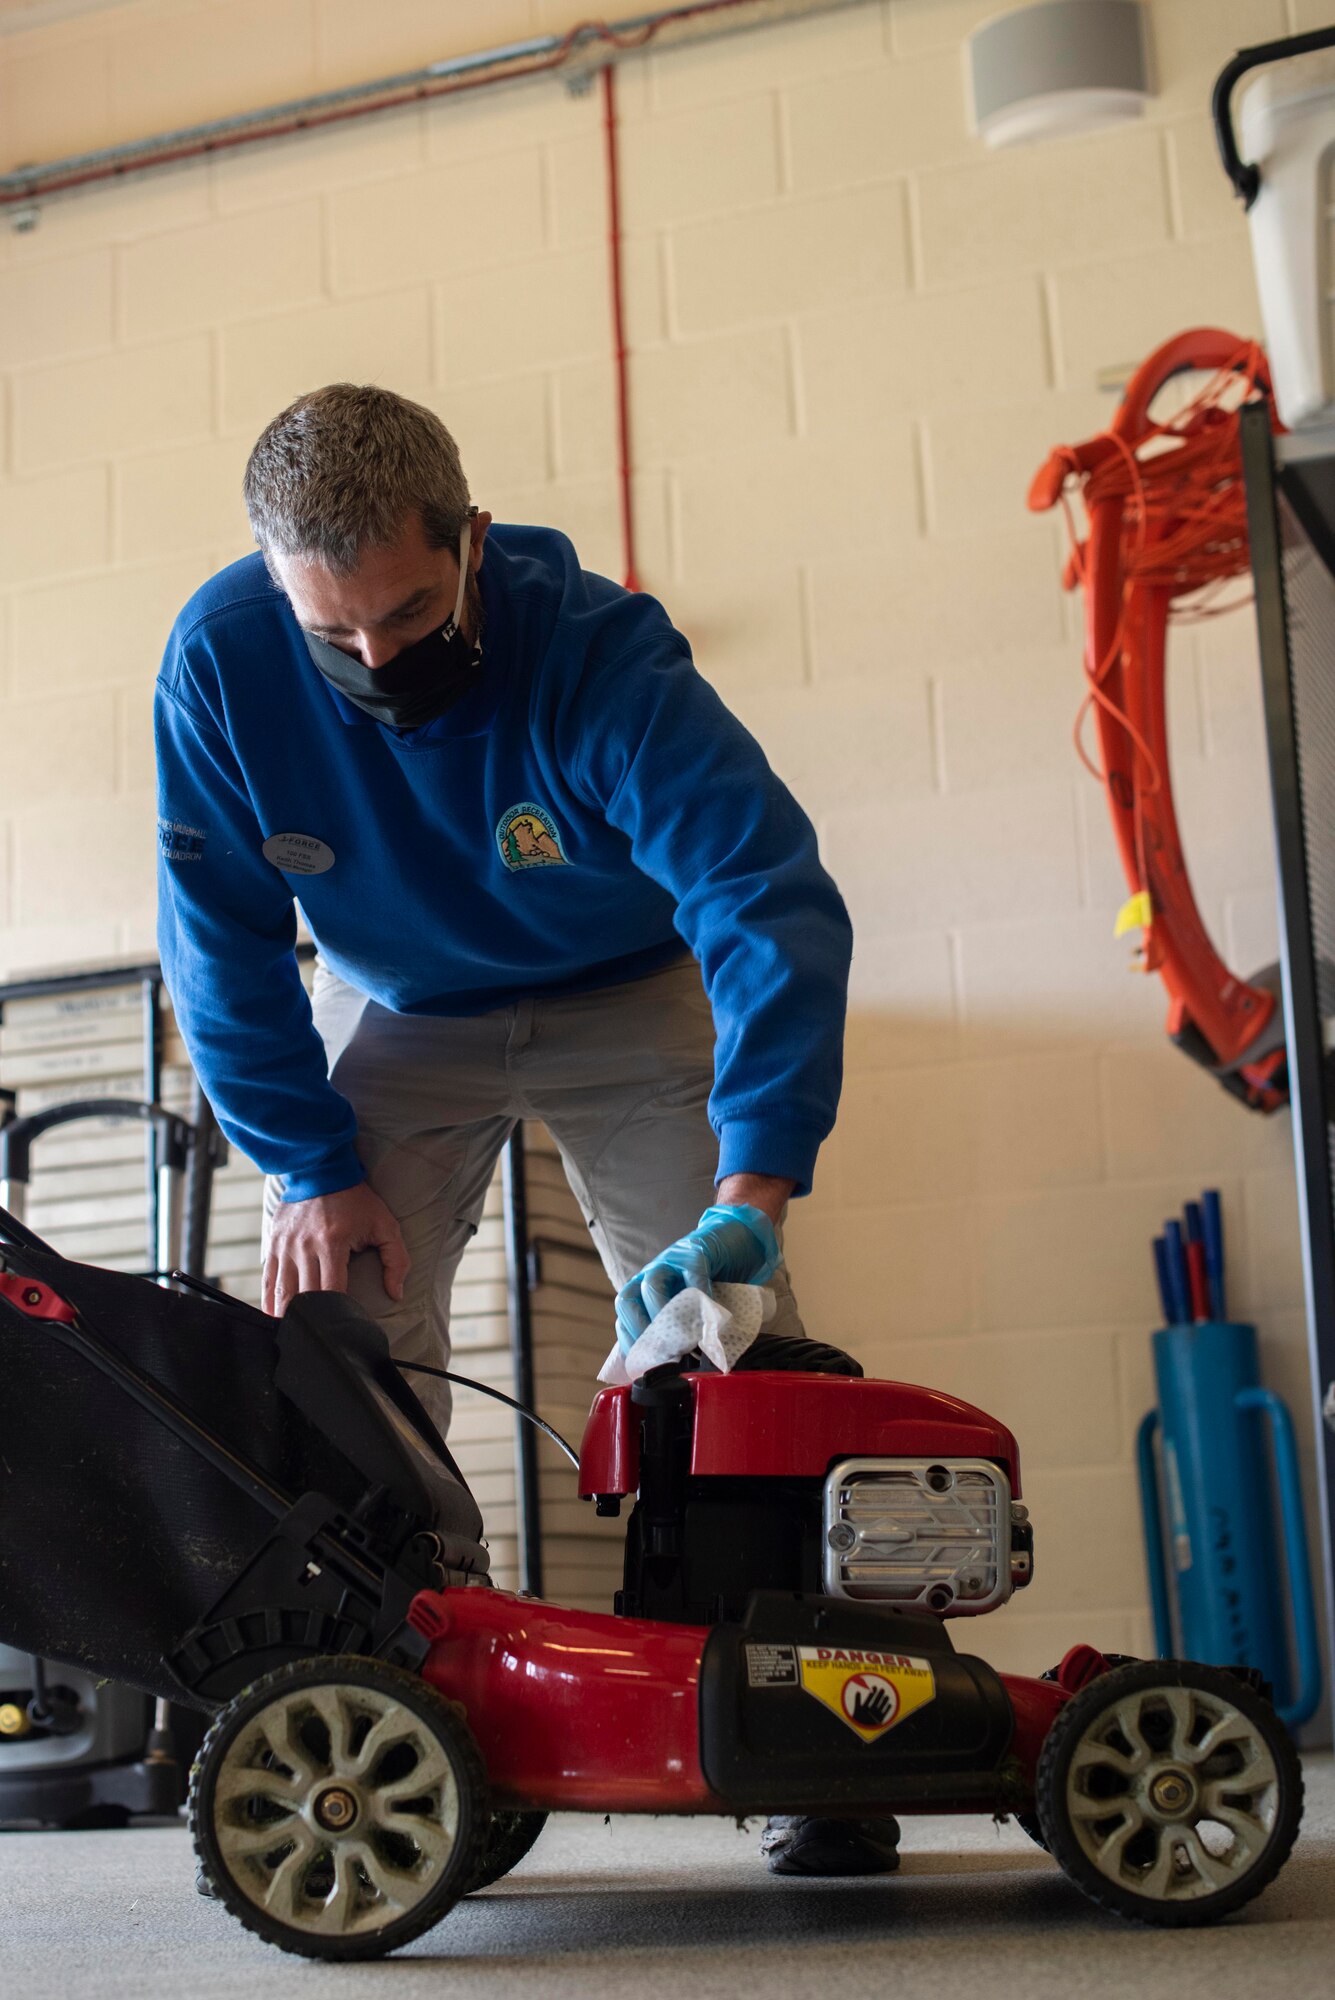 Keith Thomas, 100th Force Support Squadron Outdoor Recreation rental manager, sanitizes the top of a lawnmower inside the outdoor recreation center at RAF Mildenhall, England, May 11, 2020. To fight the spread of COVID-19, items returned from customers are thoroughly cleaned before being rented again. (U.S. Air Force photo by Airman 1st Class Joseph Barron)